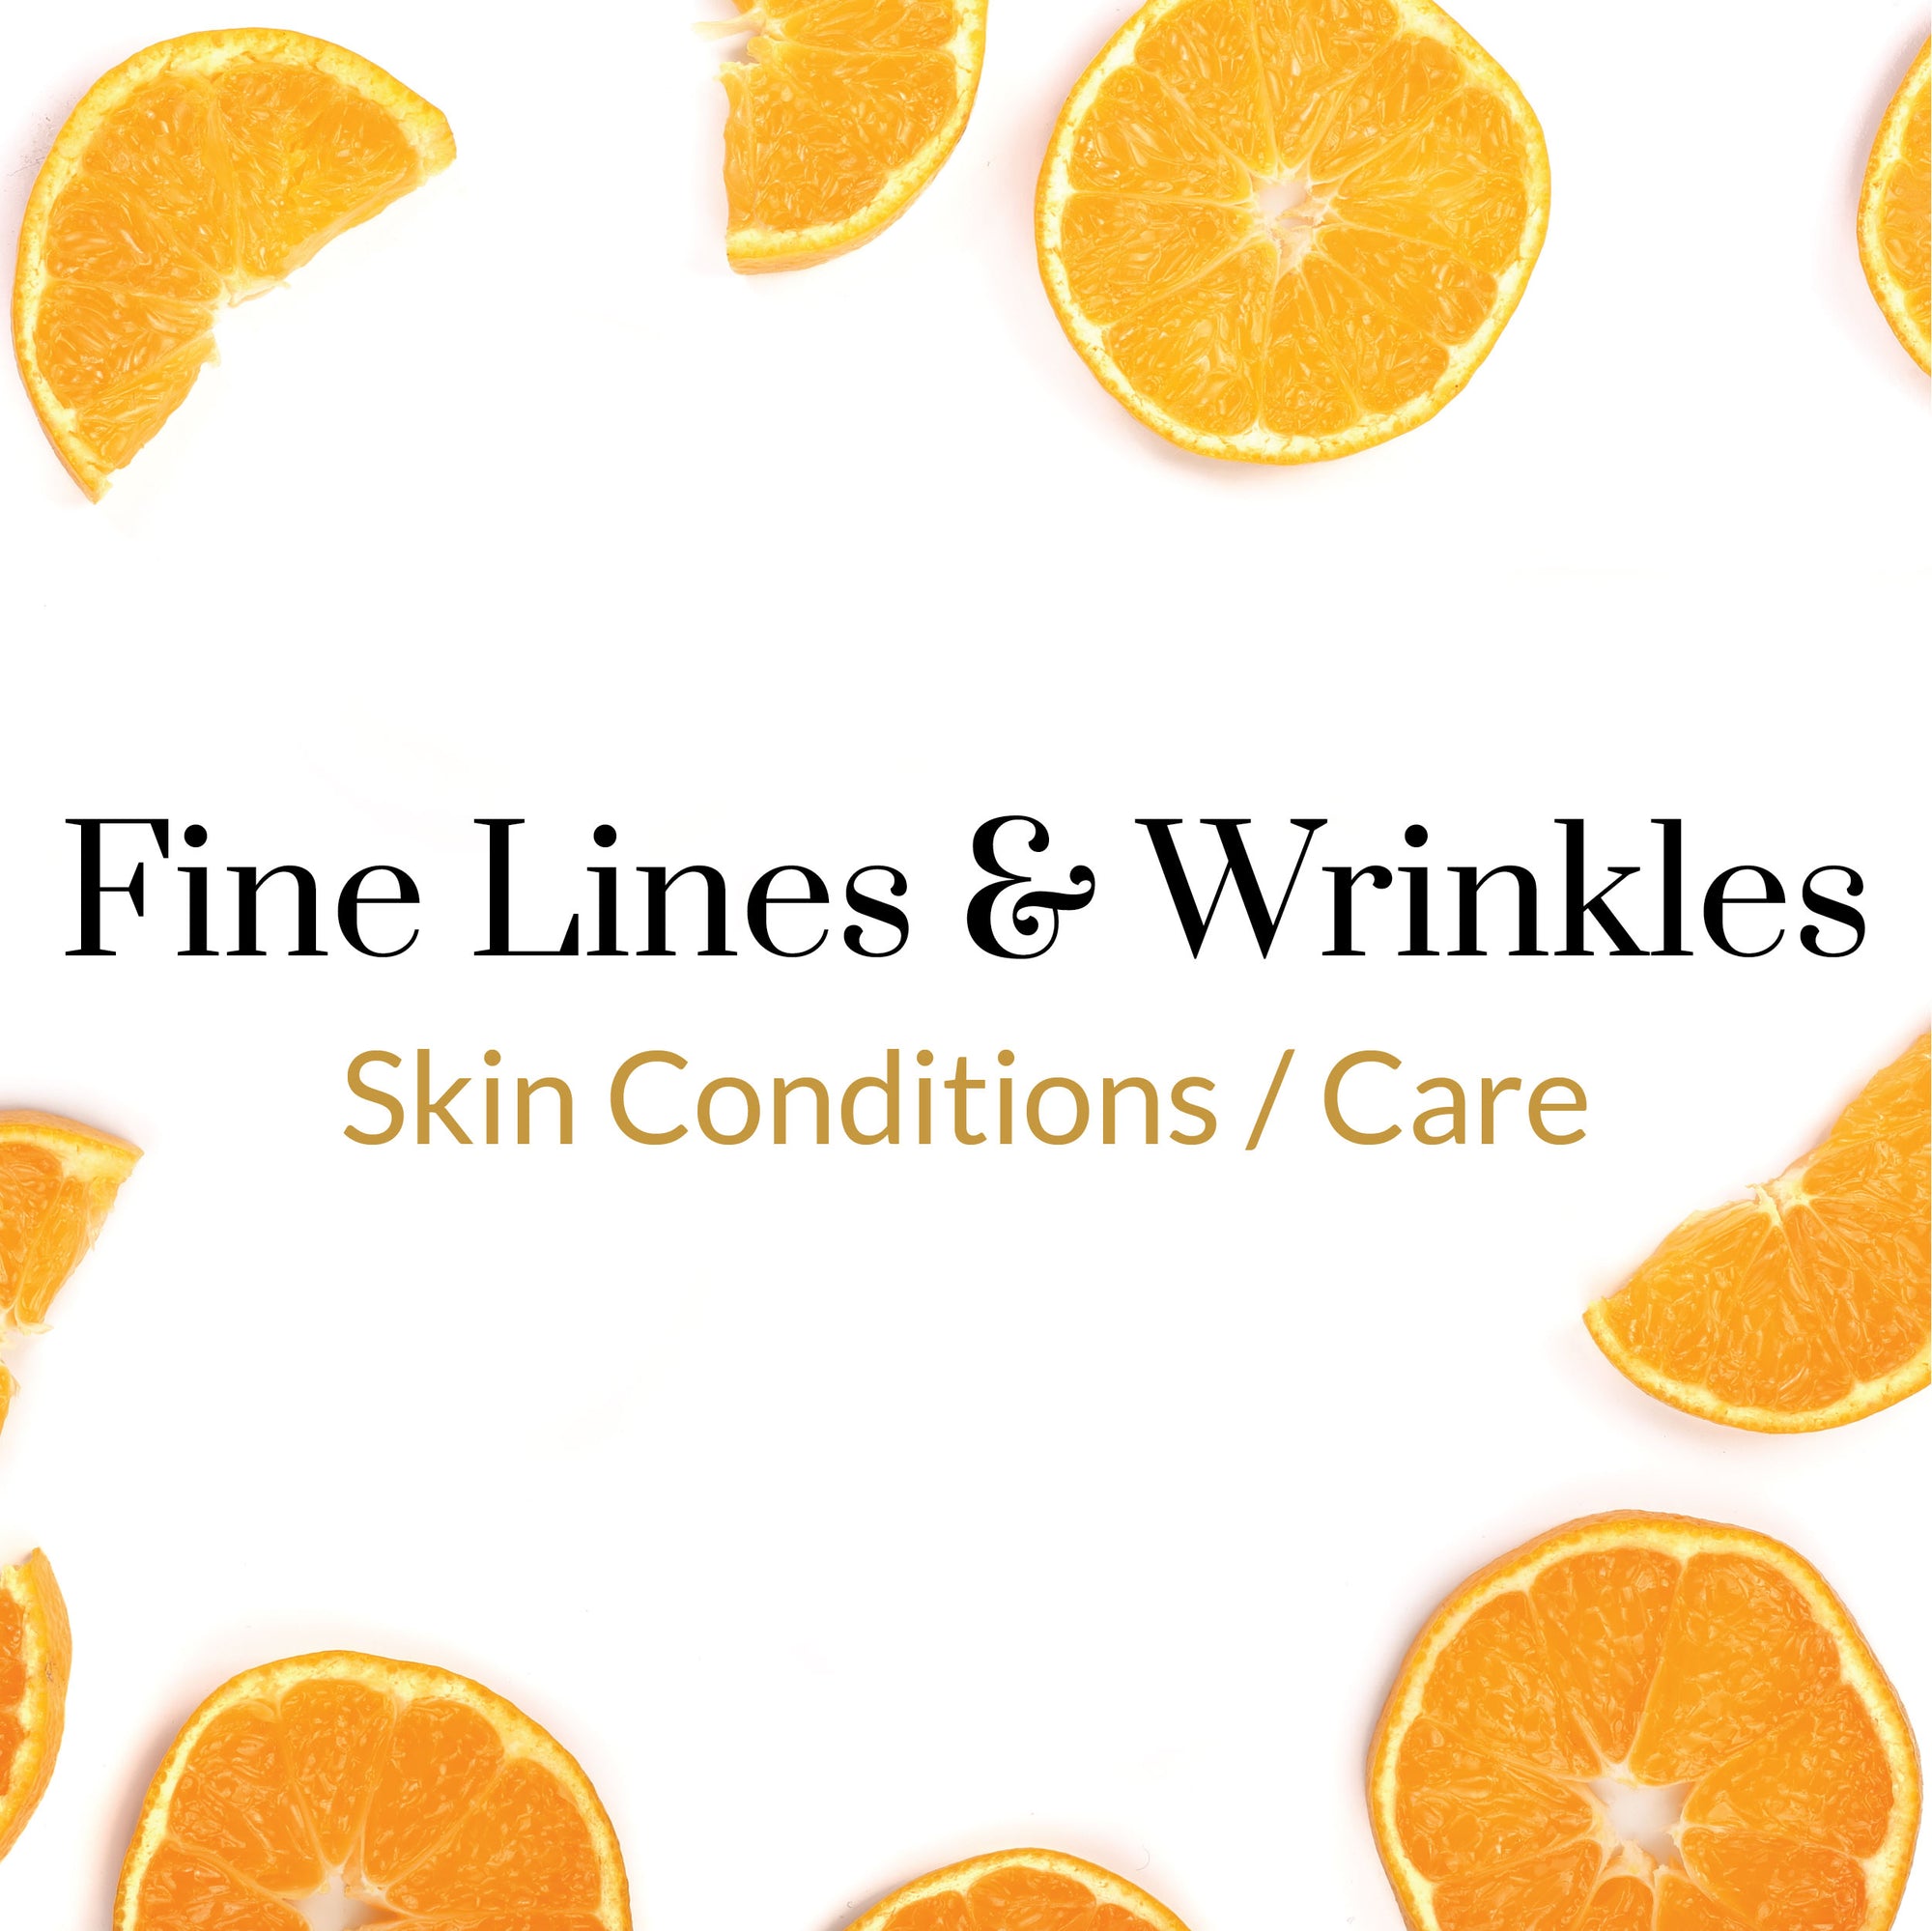 Skin Conditions/Care - Fine Lines & Wrinkles